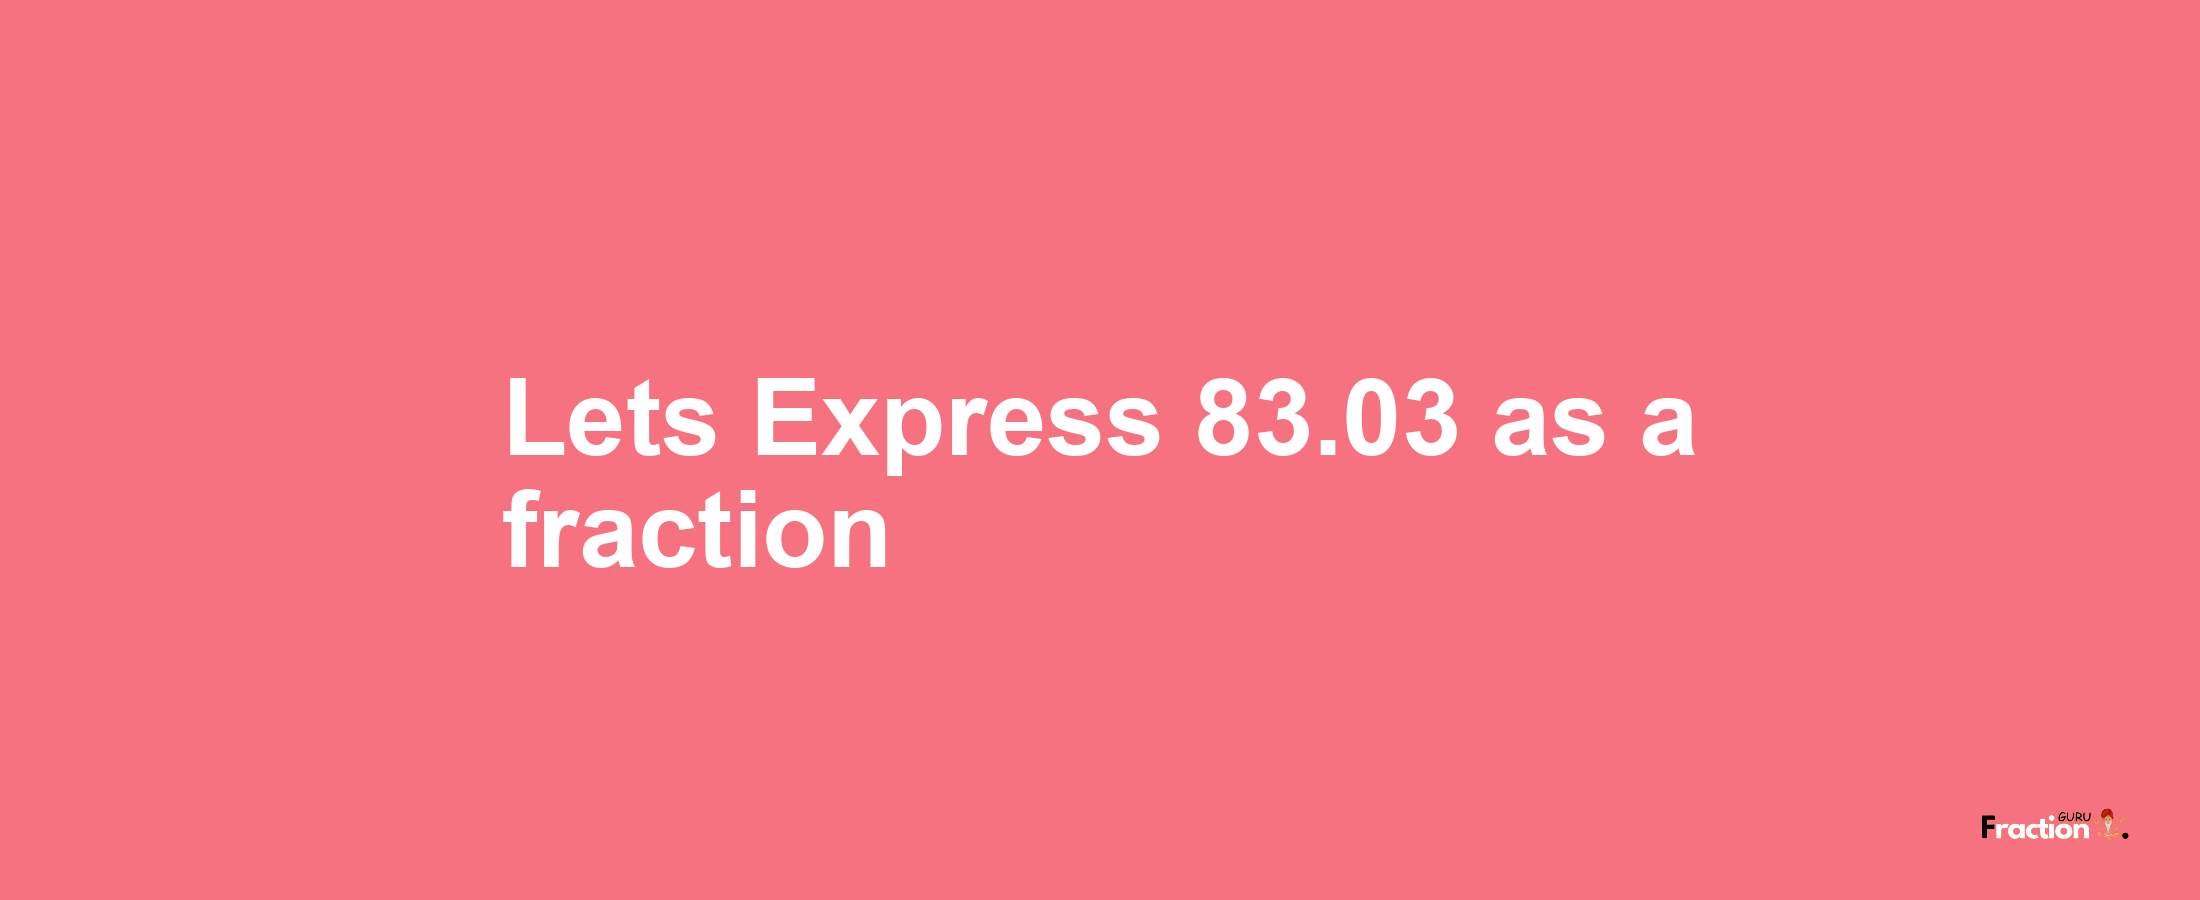 Lets Express 83.03 as afraction